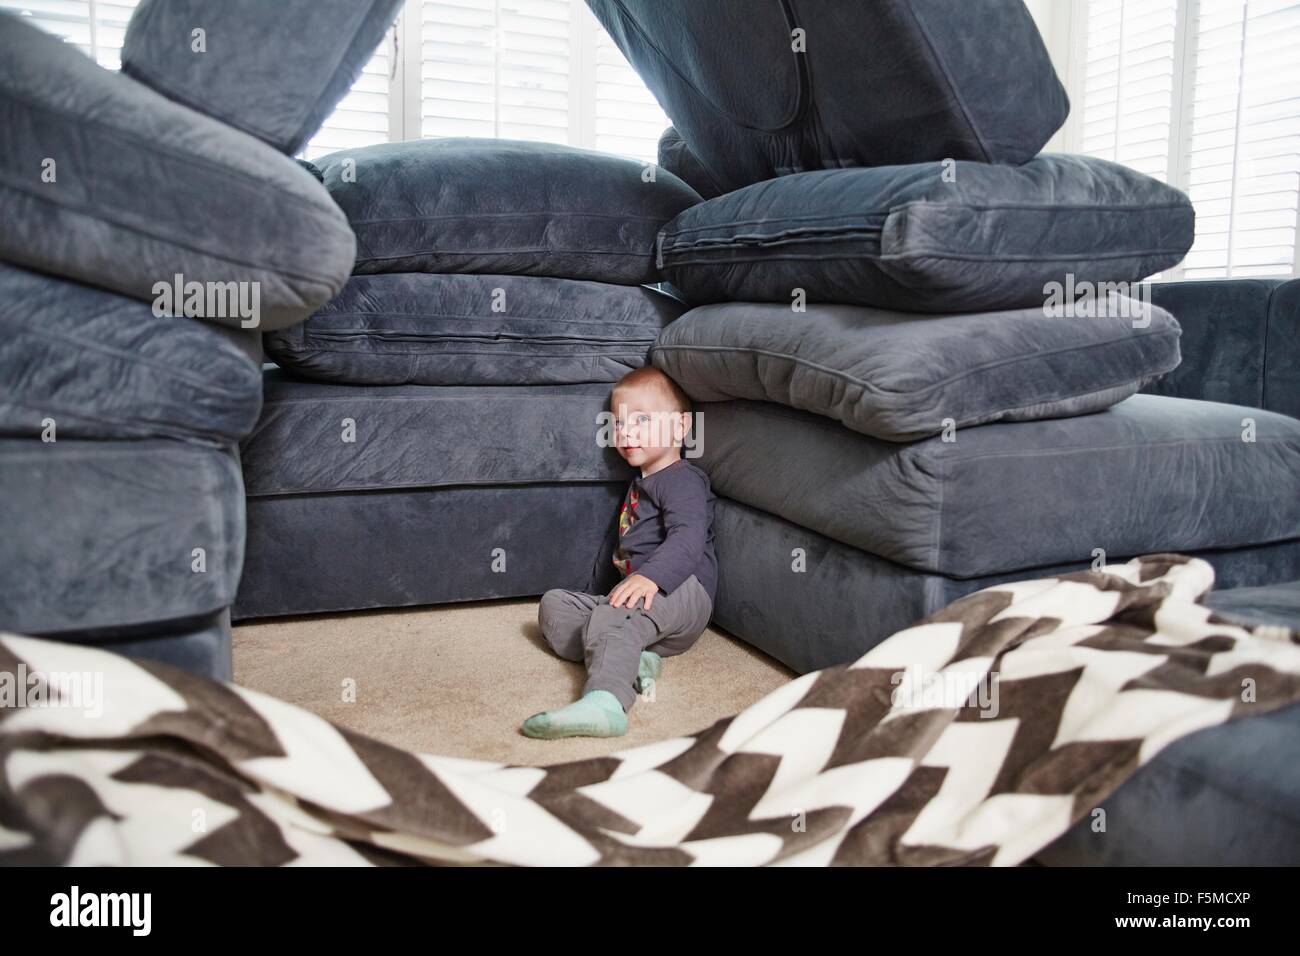 Boy leaning against pile of cushions in living room Stock Photo